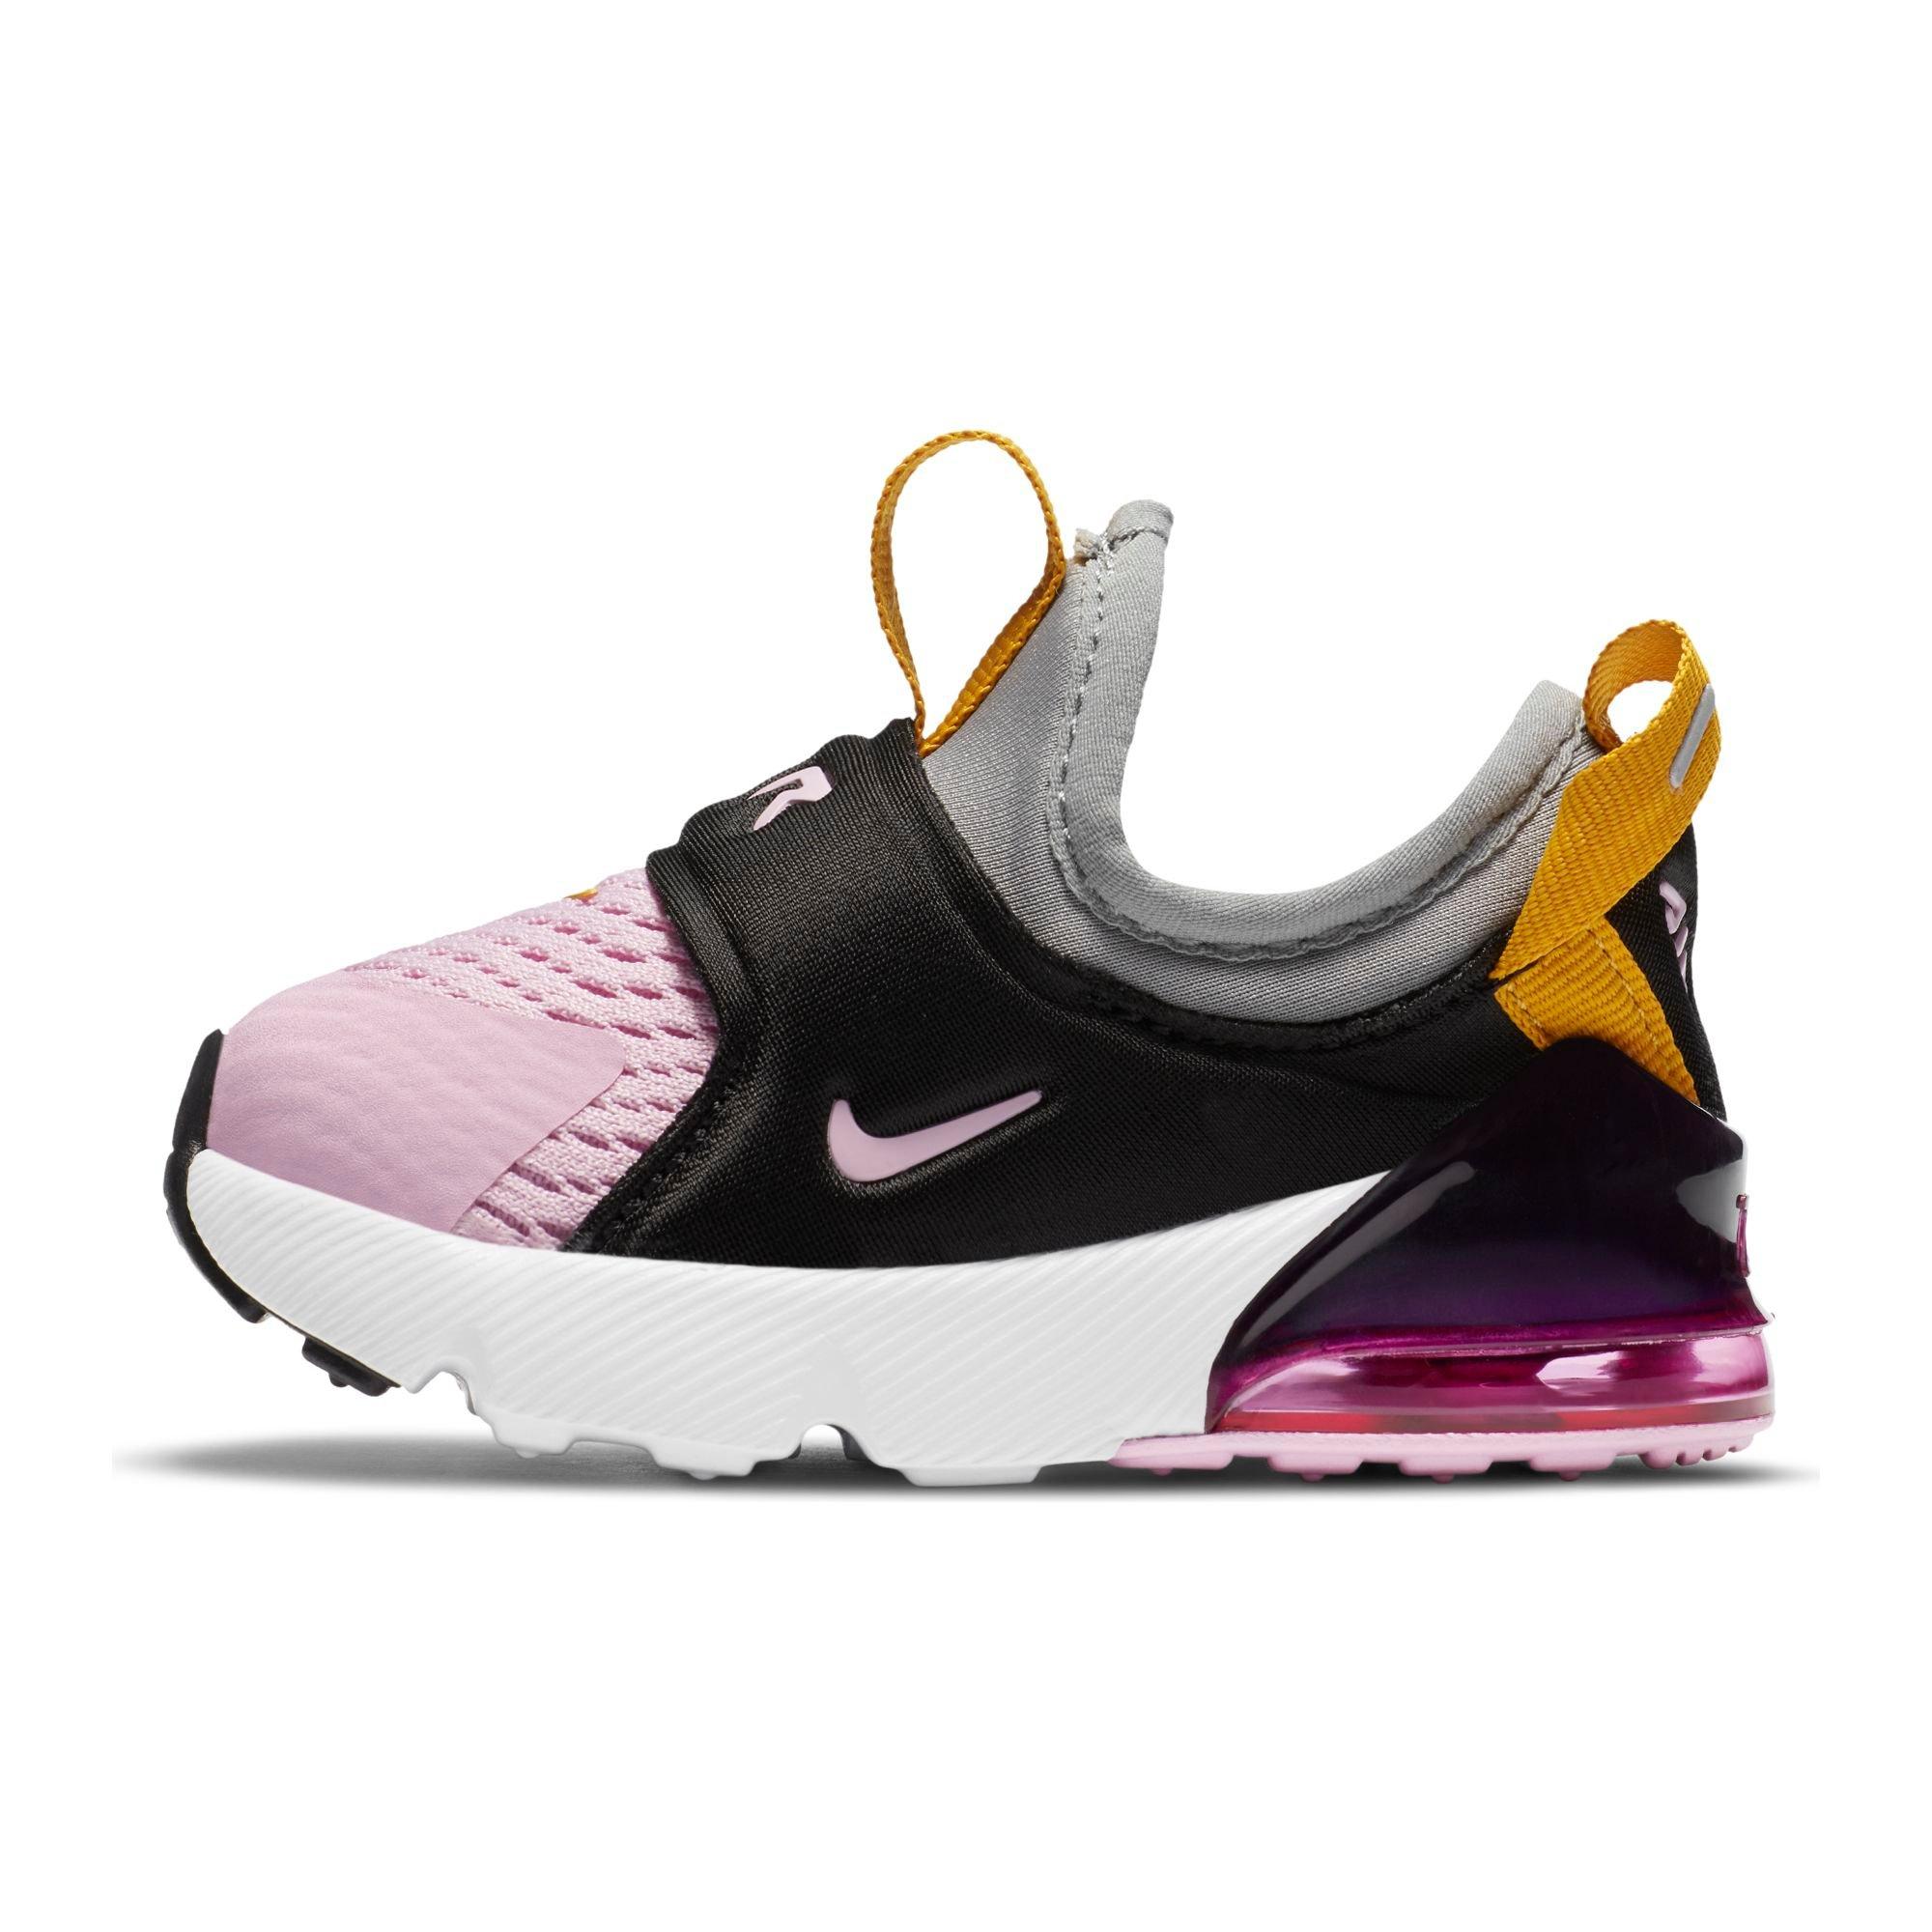 nike air max 270 extreme infant pink